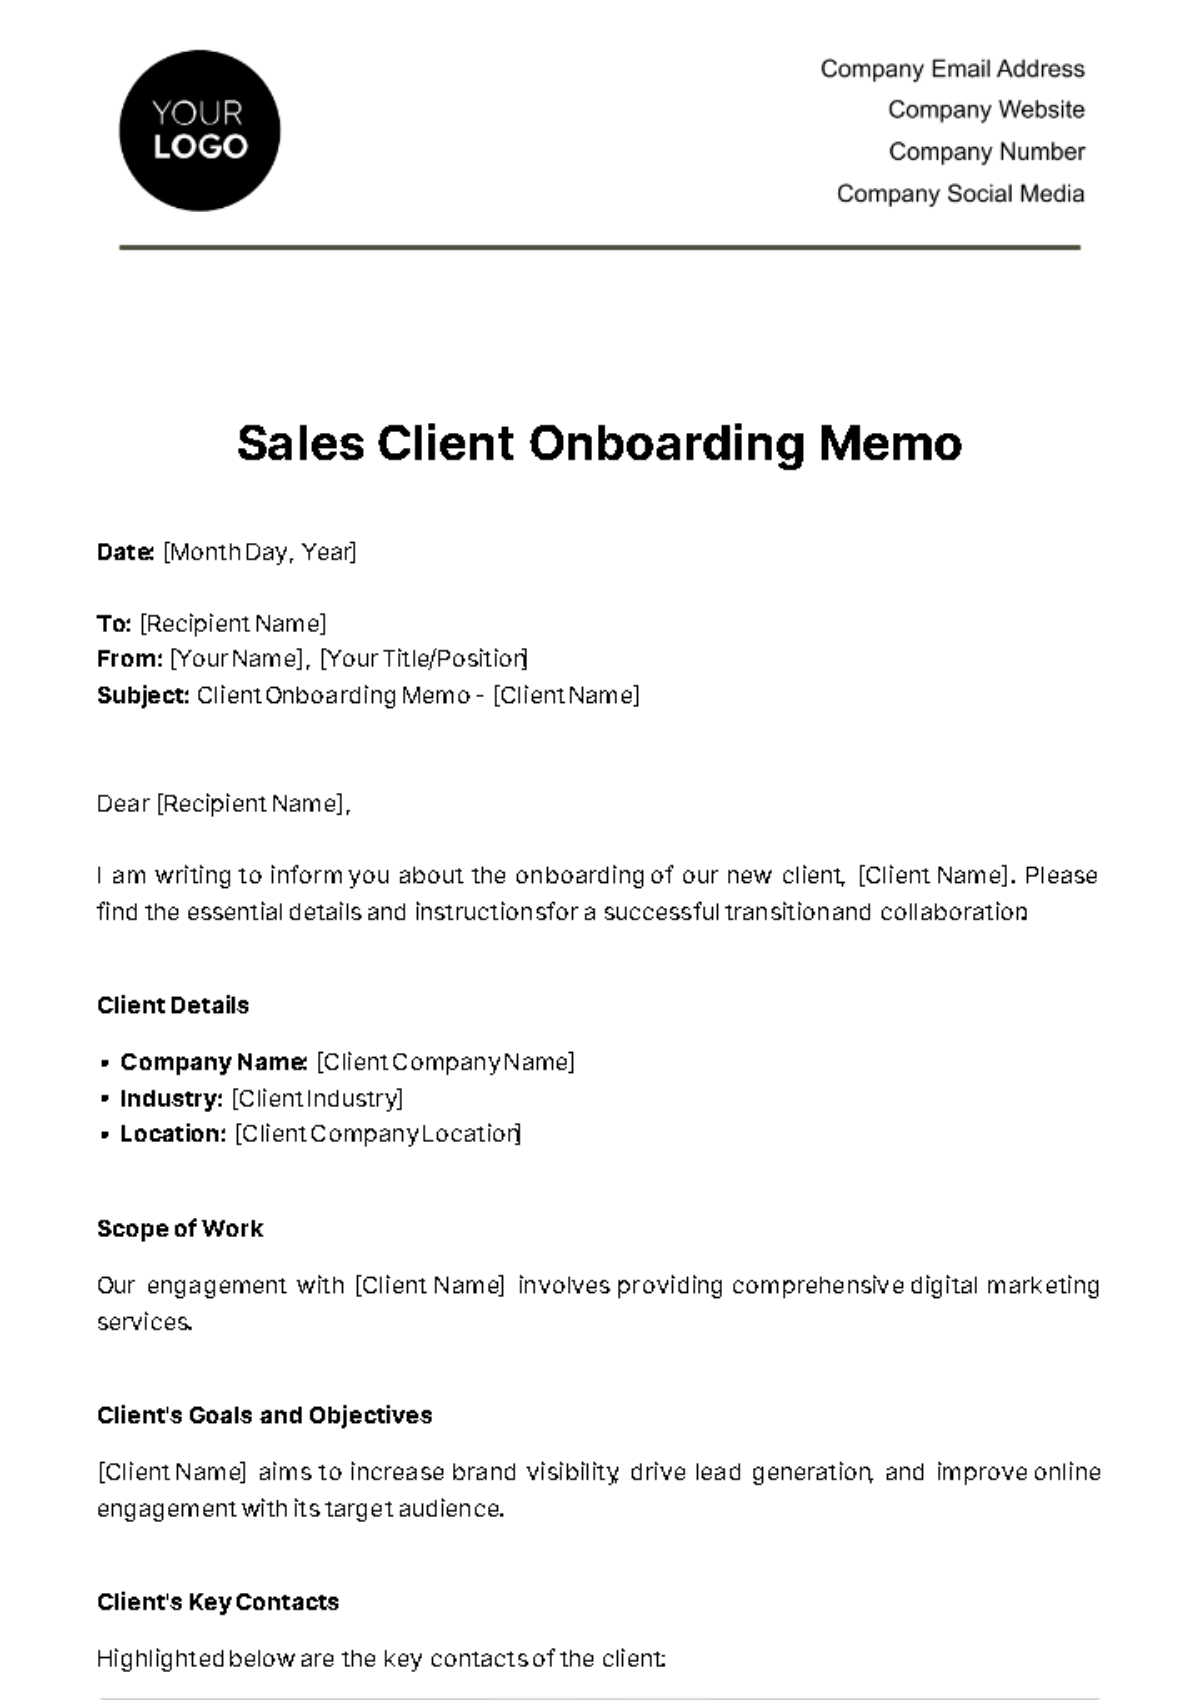 Free Sales Client Onboarding Memo Template